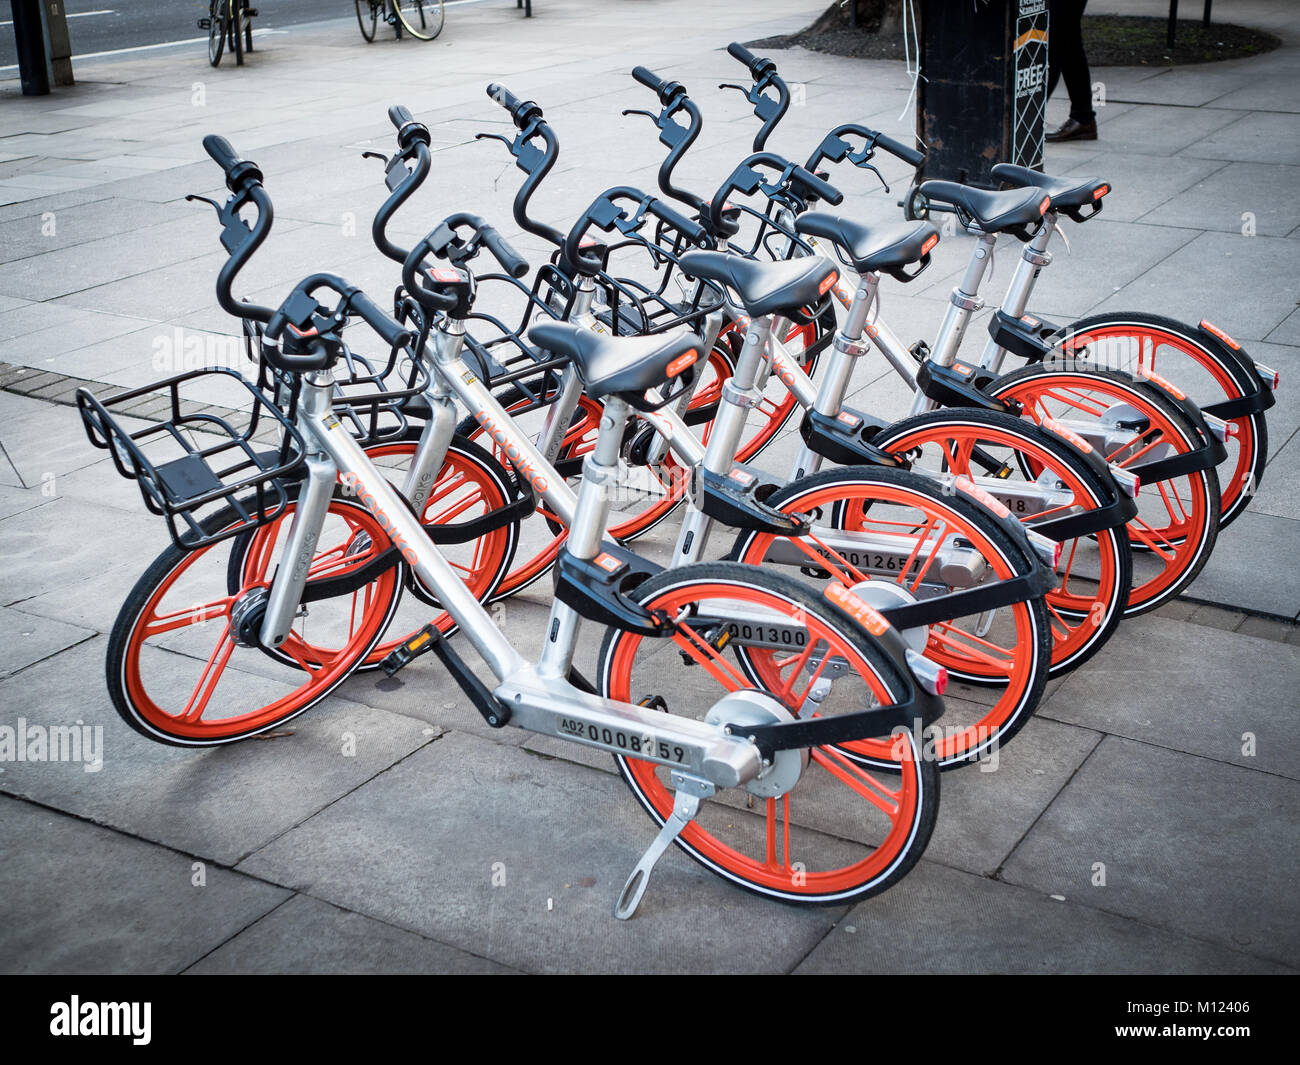 Mobike dockless hire bikes in London - Mobike is a Chinese bike hire company rolling out across the UK Stock Photo